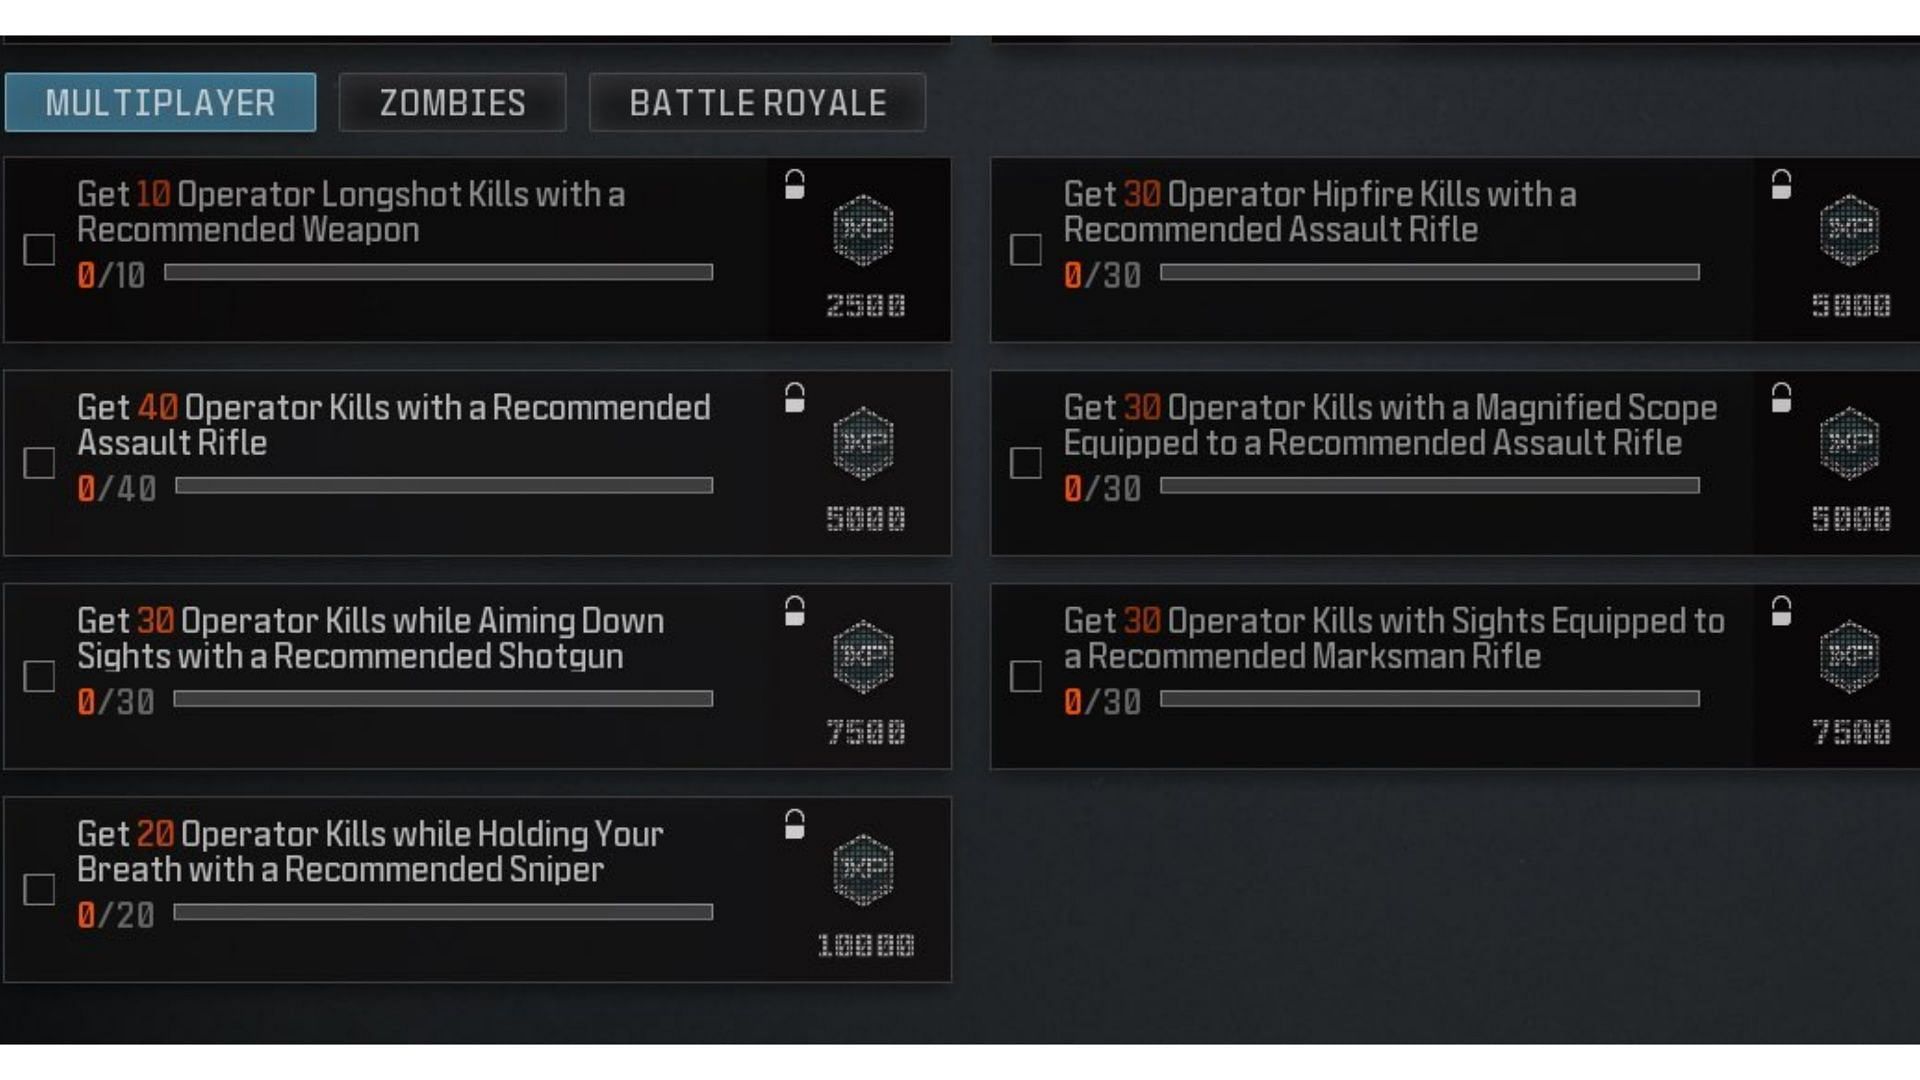 Multiplayer challenges (Image via Activision)